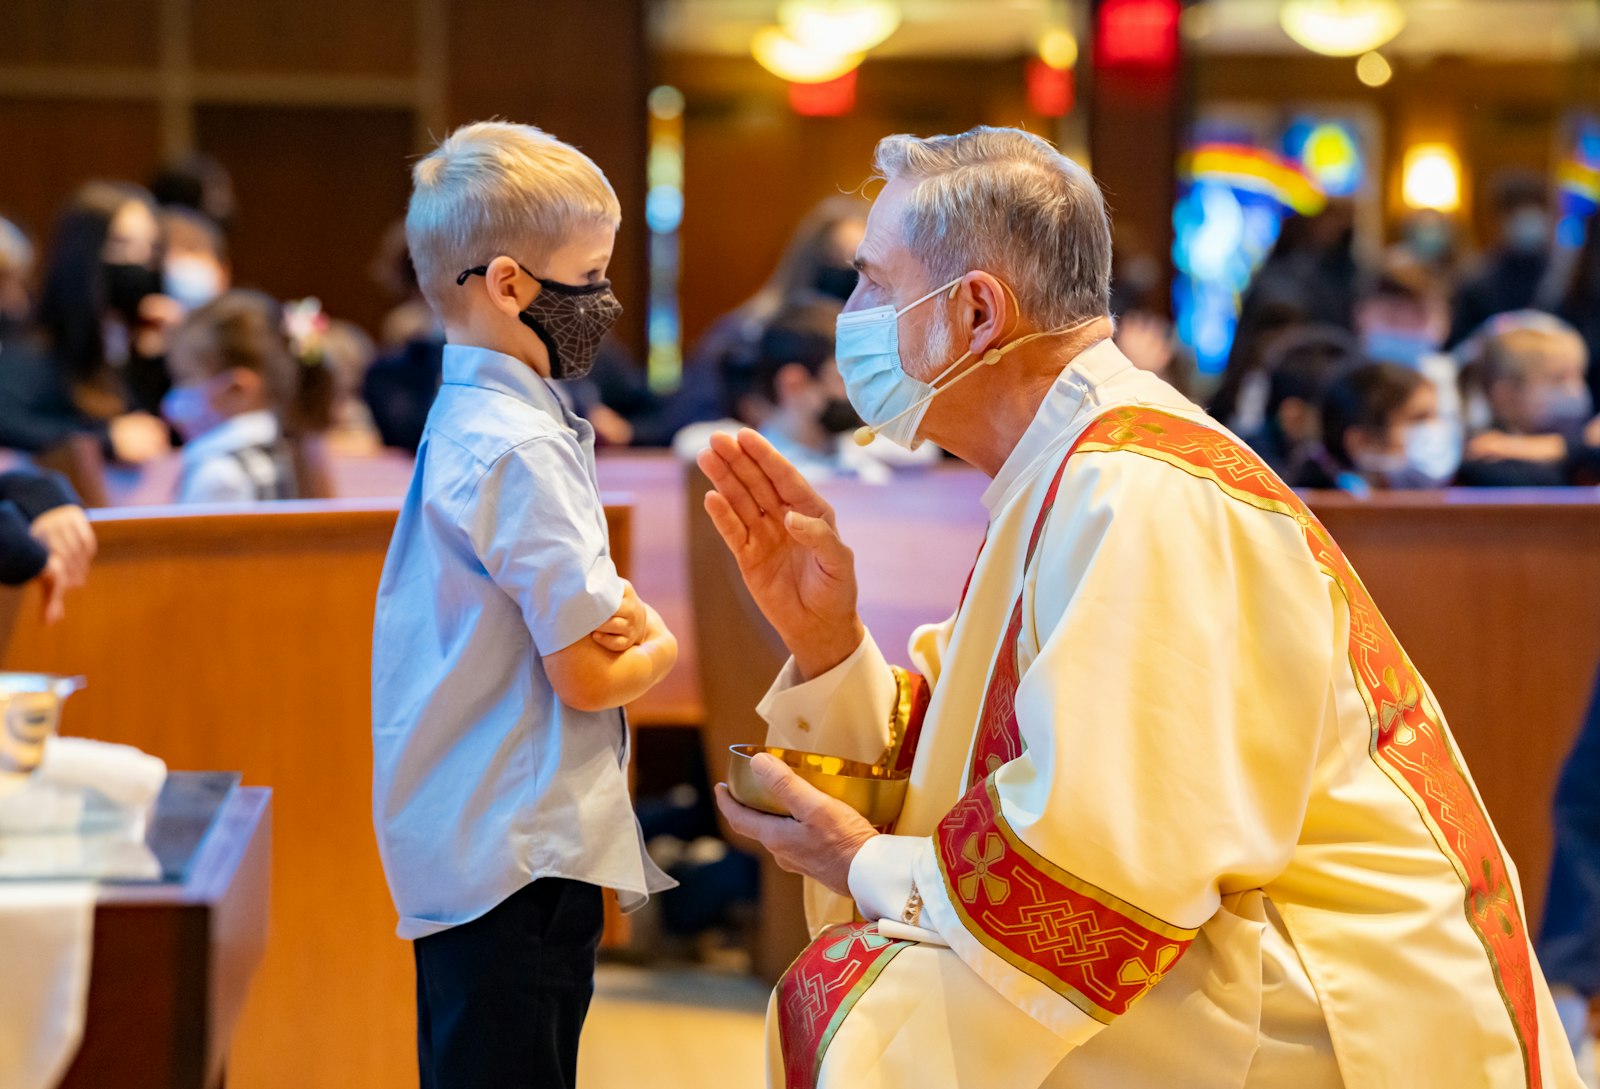 Holy Name students attend an all-school Mass in early November. Catholic schools across the Archdiocese of Detroit have experienced increased enrollment as parents discovered the benefits of a Catholic education since the pandemic began.